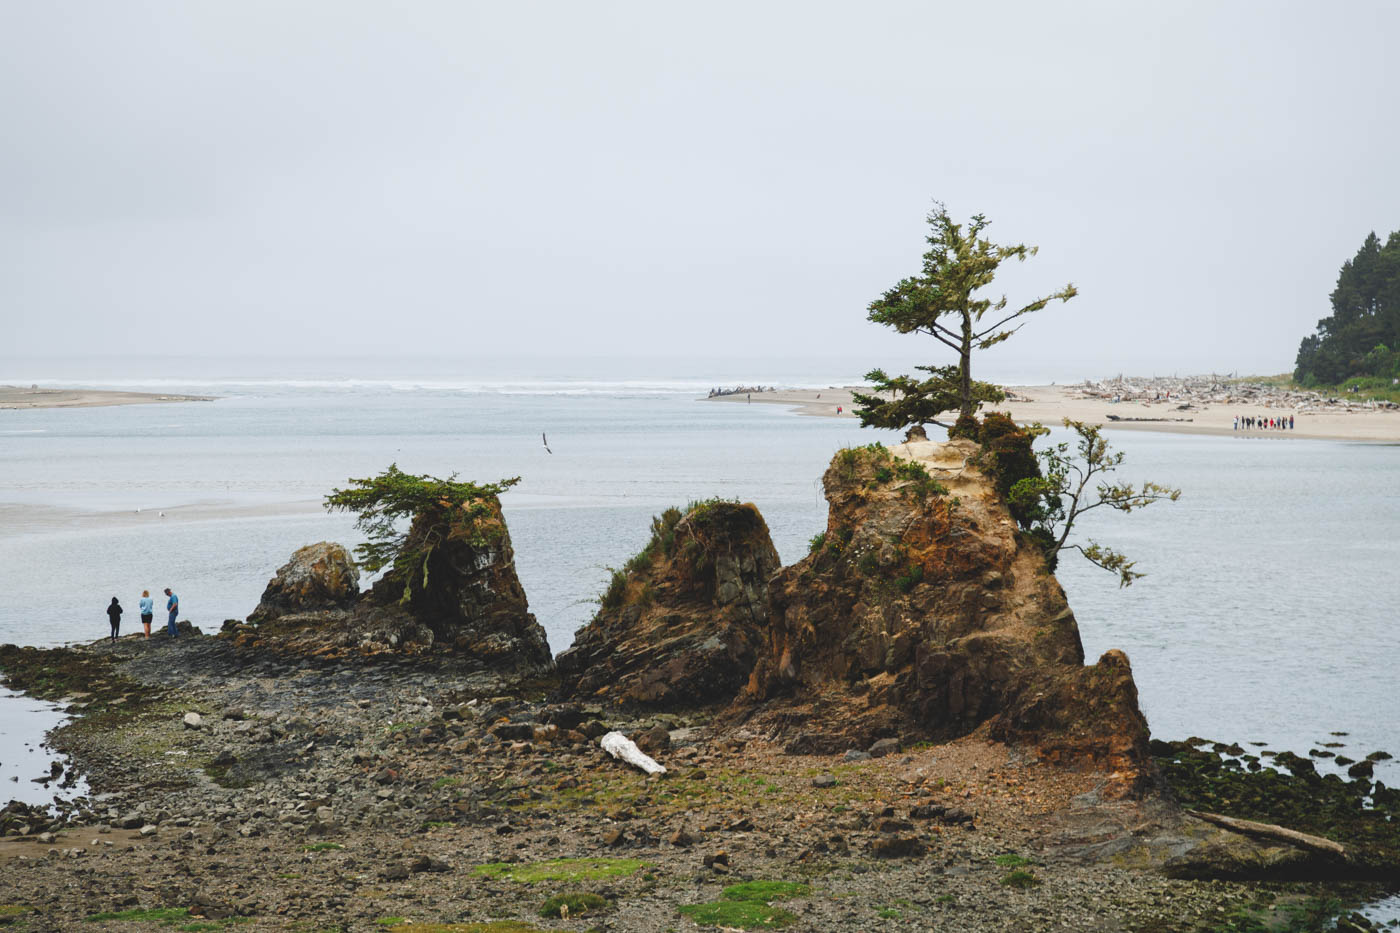 Tourists standing on Siletz Bay besides rock formations on an overcast day.